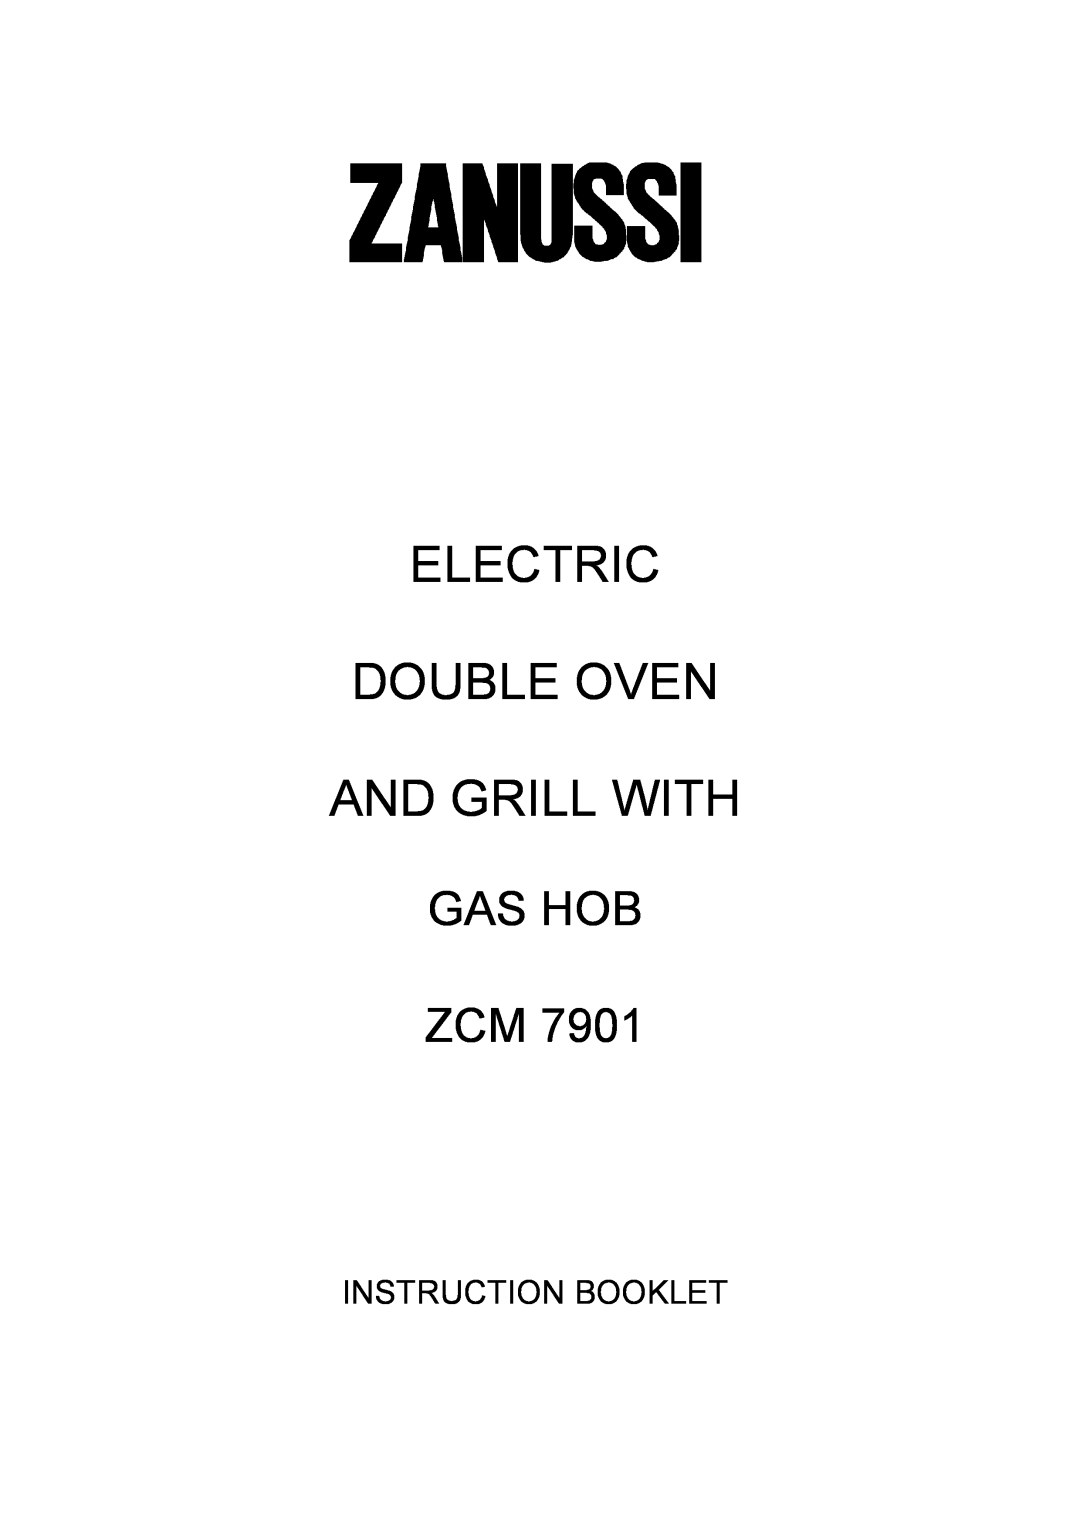 Zanussi ZCM 7901 manual Electric Double Oven And Grill With, Gas Hob Zcm, Instruction Booklet 